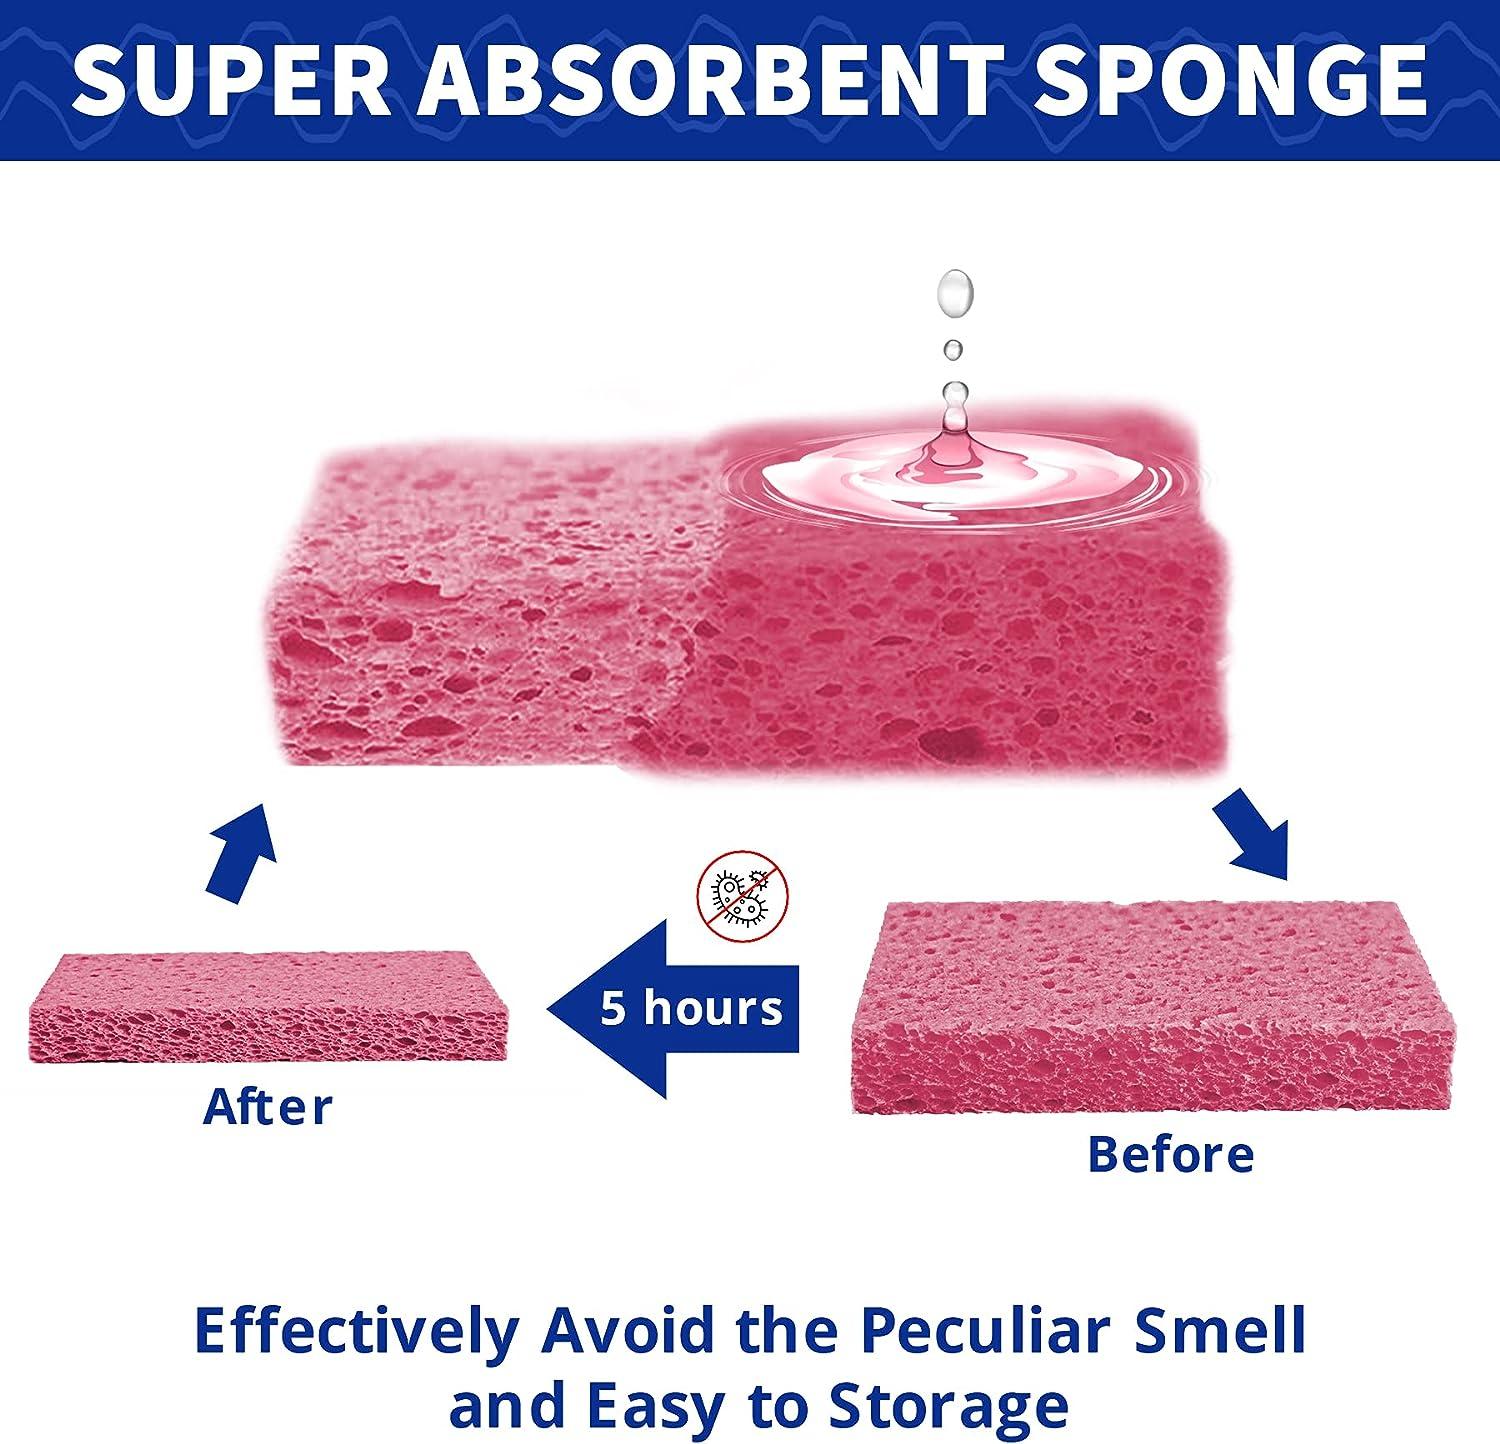 How To Make Your Own Eco-friendly Dish Sponge